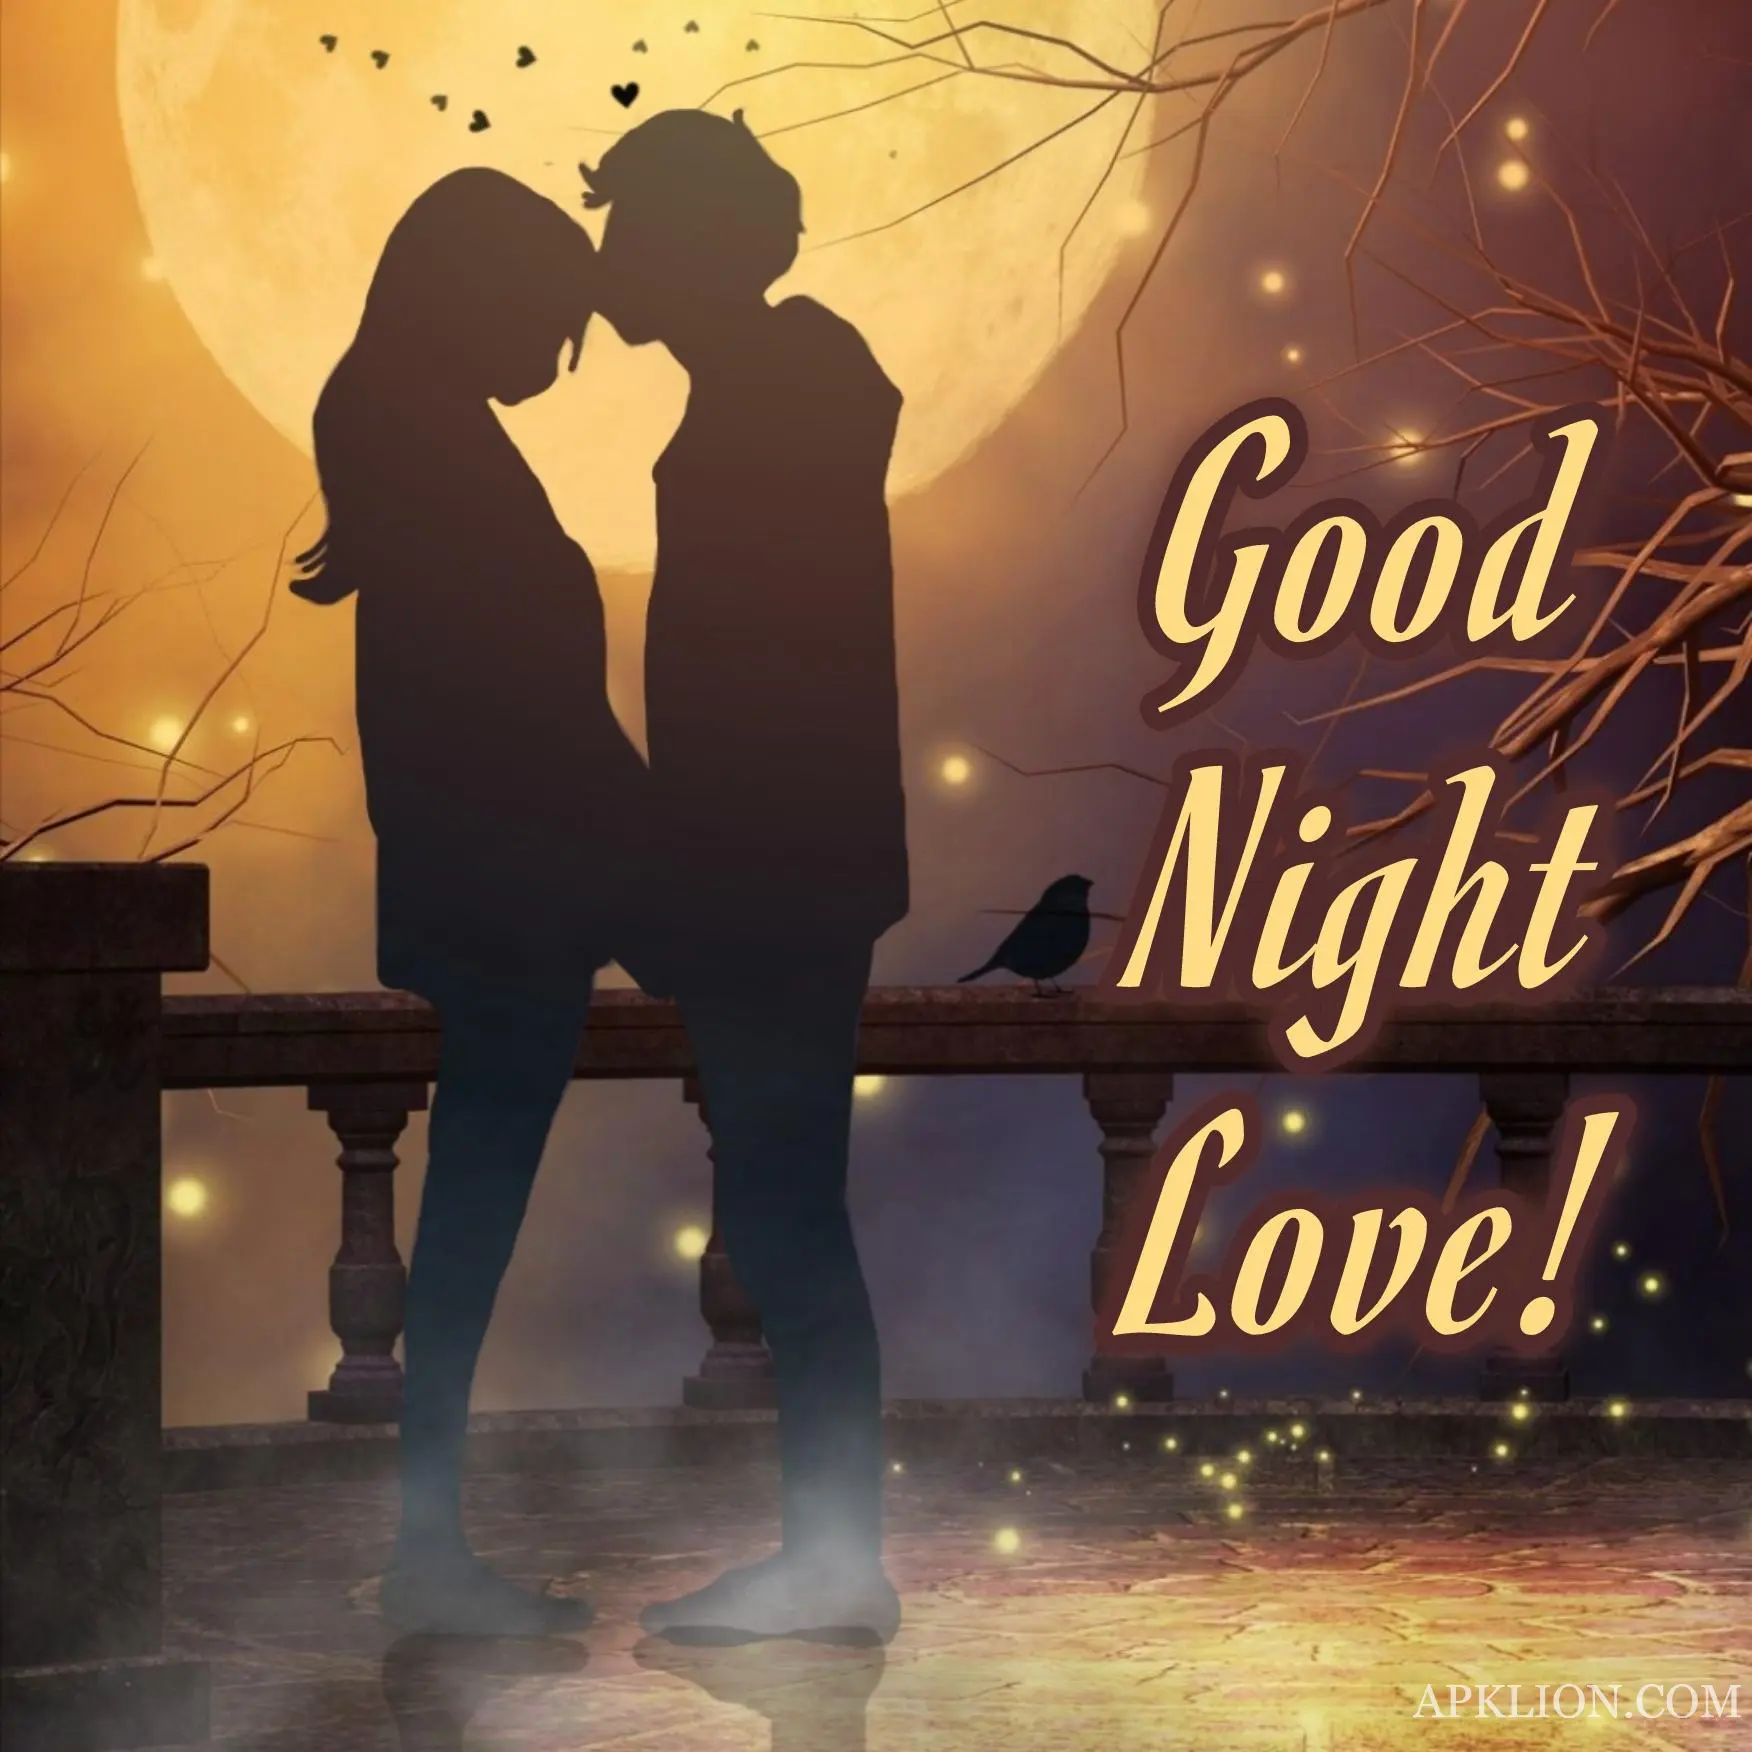 good night love images hd 1080p download